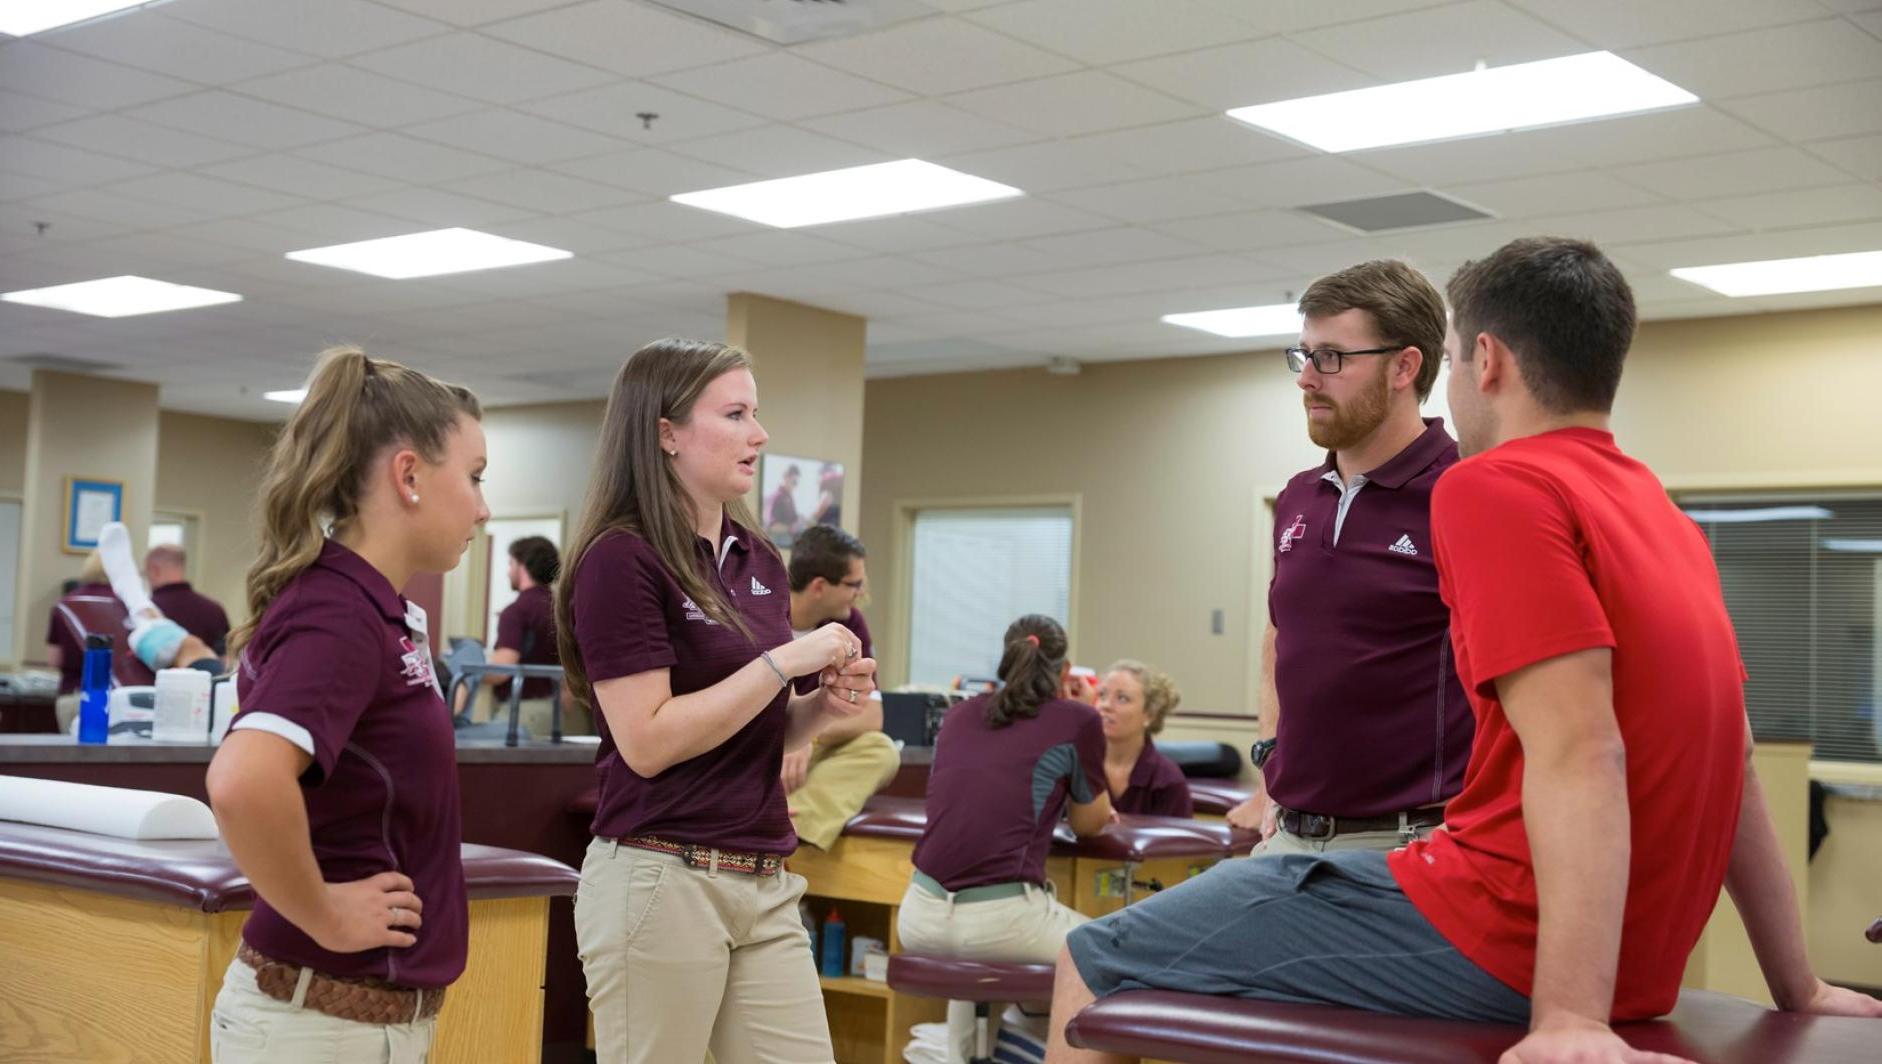 Three athletic training students consult with a client in the athletic training facility